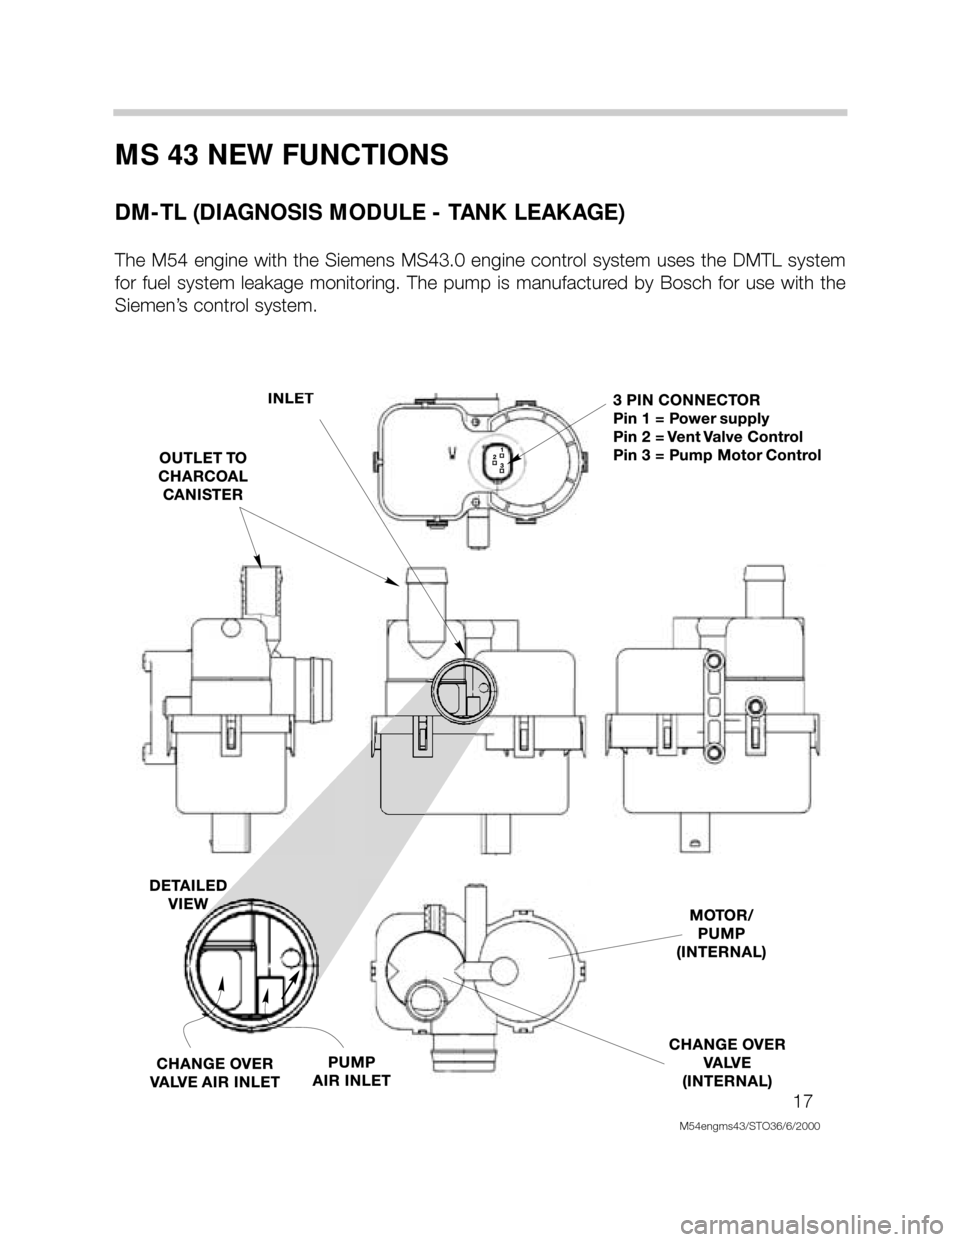 BMW X5 2000 E53 M54 Engine User Guide 17
M54engms43/STO36/6/2000
MS 43 NEW FUNCTIONS
DM-TL (DIAGNOSIS MODULE - TANK LEAKAGE)
The  M54  engine  with  the  Siemens  MS43.0  engine  control  system  uses  the  DMTL  system
for  fuel  system 